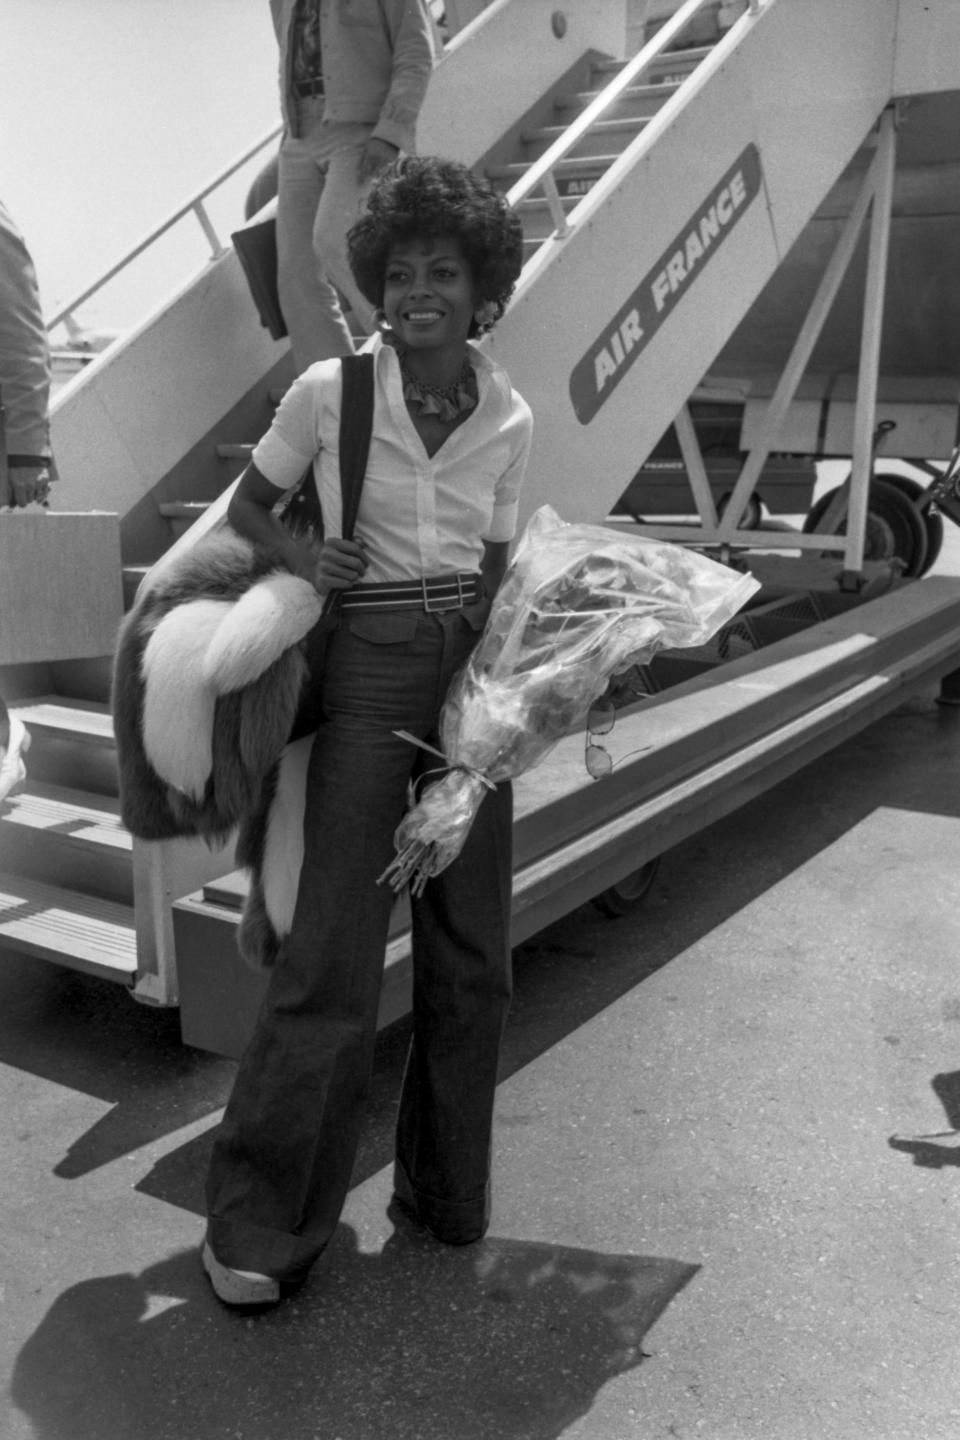 Diana Ross arrives at Nice airport in France for the Cannes Festival in May 24, 1973.